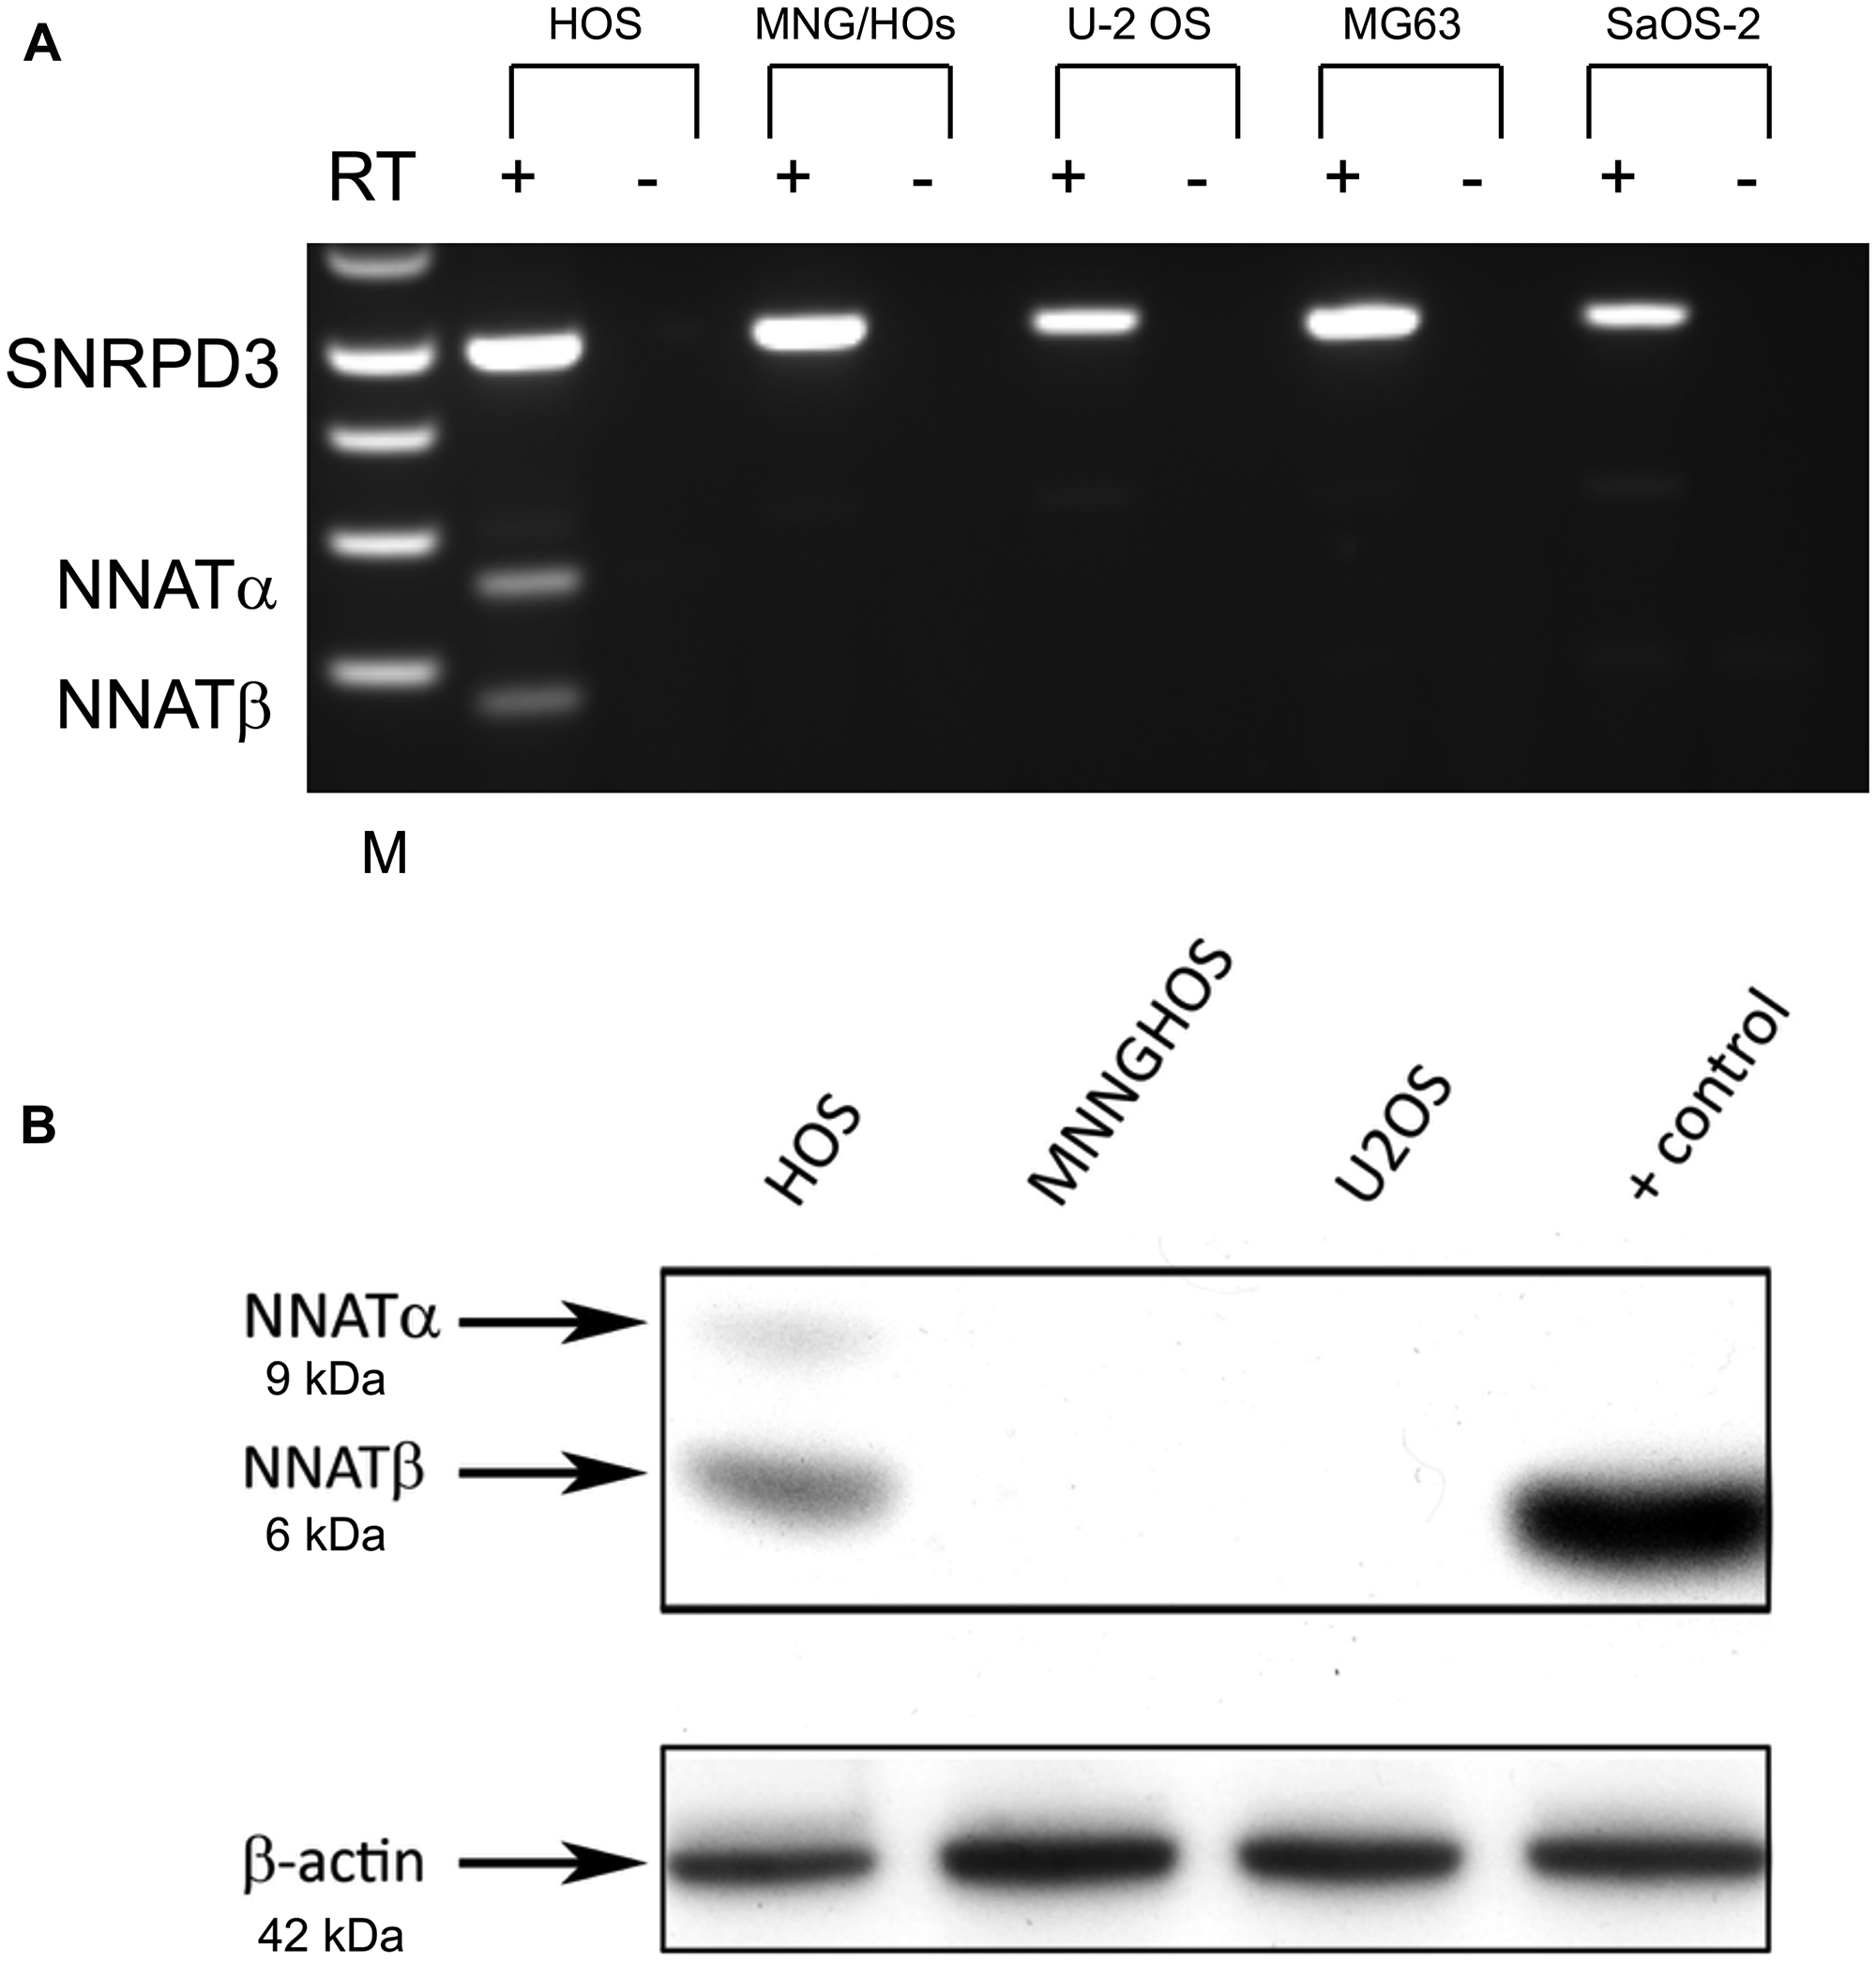 NNAT expression is detected in an osteosarcoma cell line exhibiting the normal imprinted hemimethylation pattern but not in cell lines exhibiting NNAT hypermethylation.